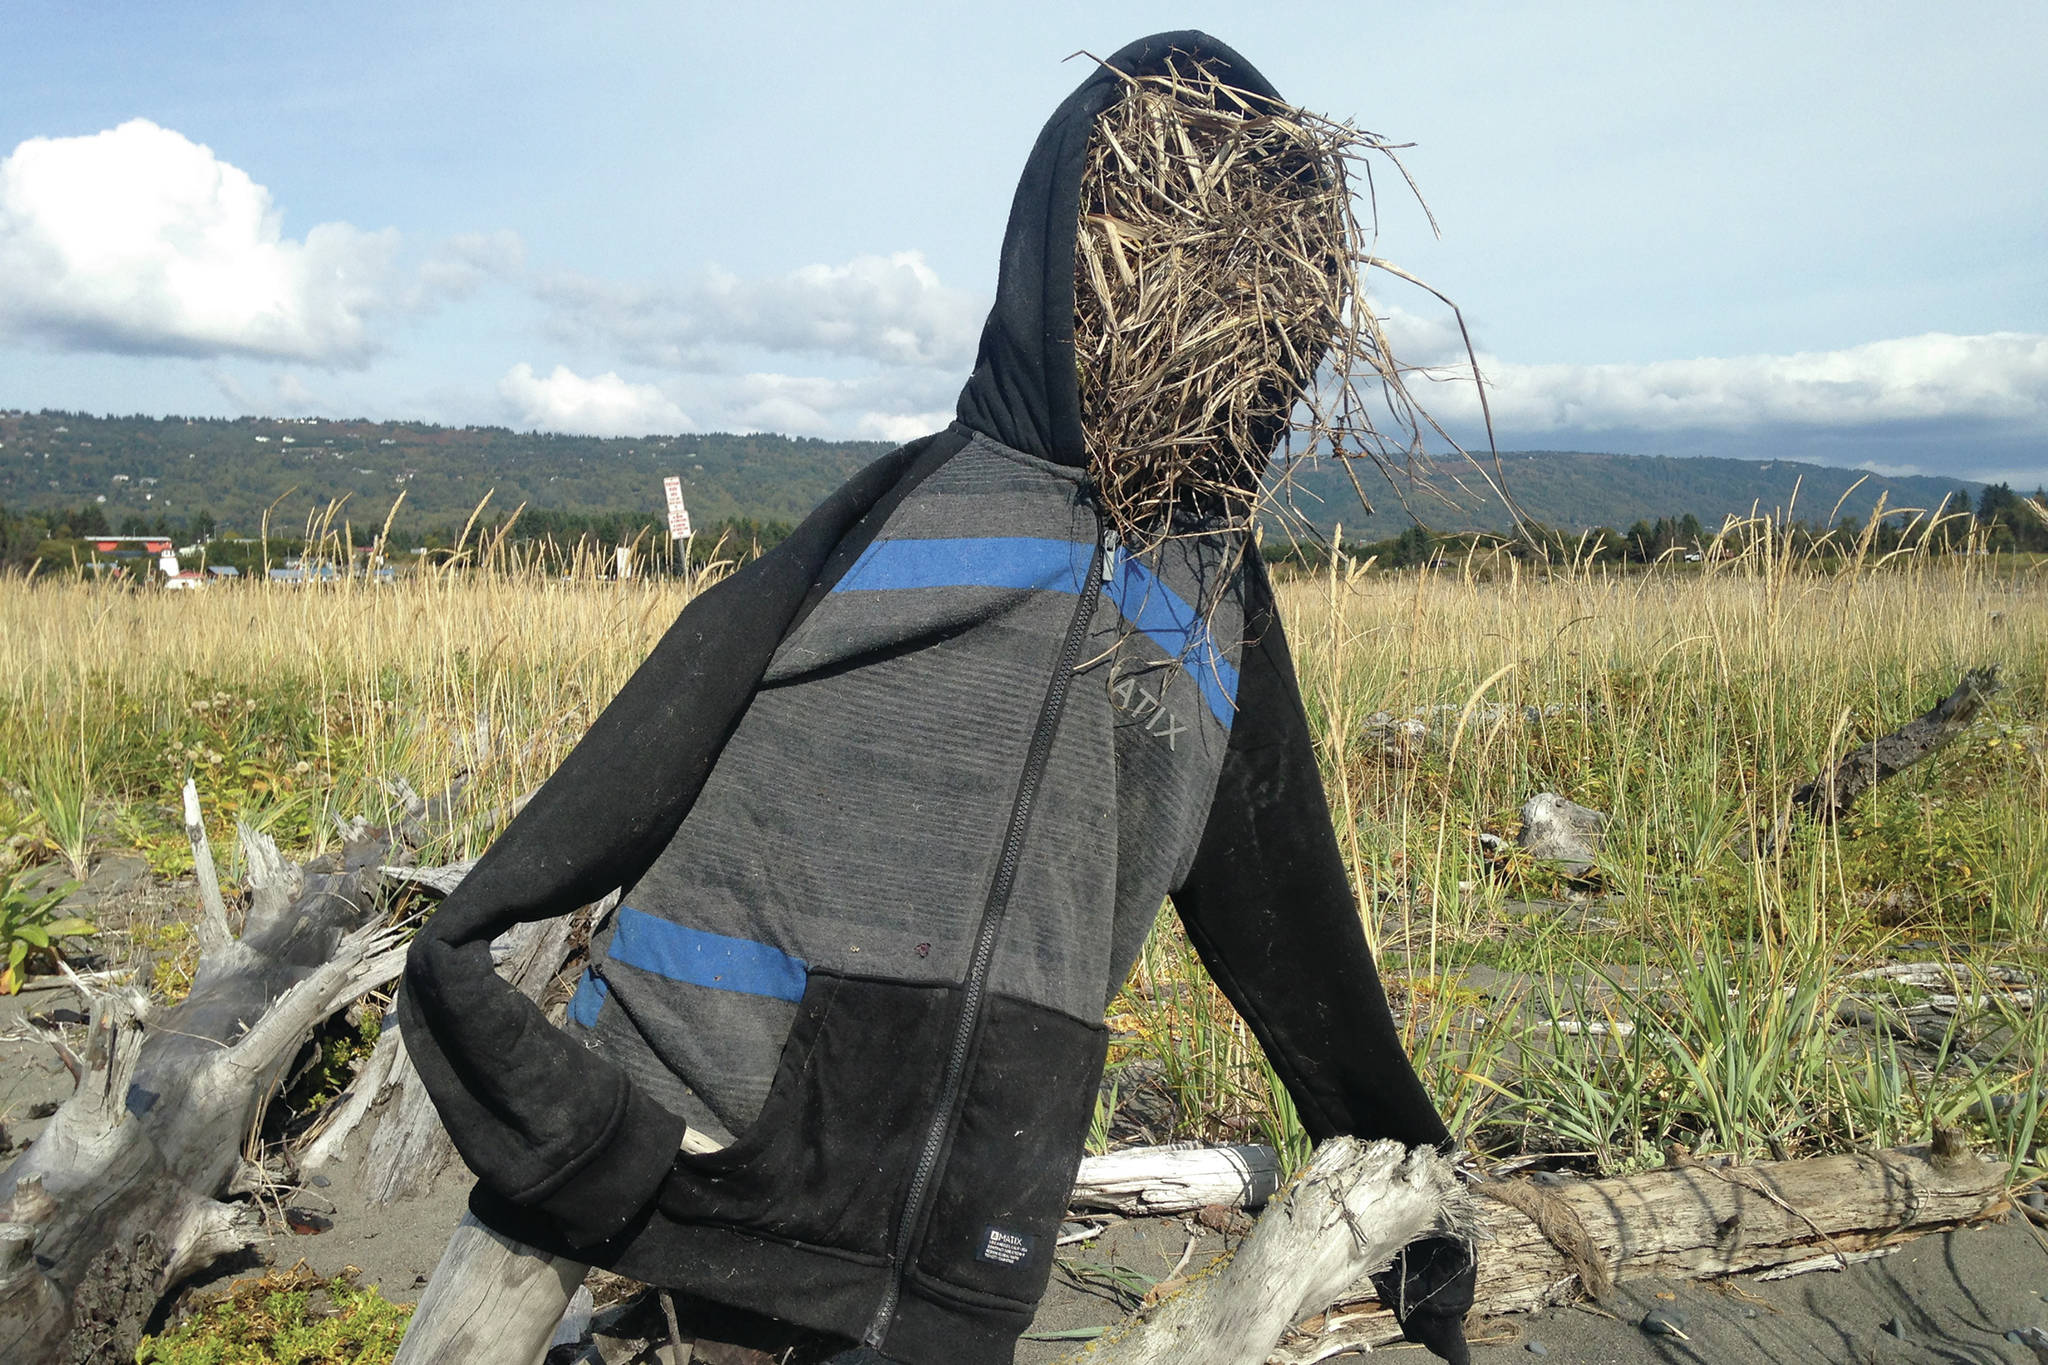 Straw man Someone stuffed with grass a coat that washed up on the Homer Spit beach on Thursday, Sept. 5, 2019, in Homer, Alaska. No crows were observed in the vicinity of the impromptu art. (Photo by Michael Armstrong/Homer News)